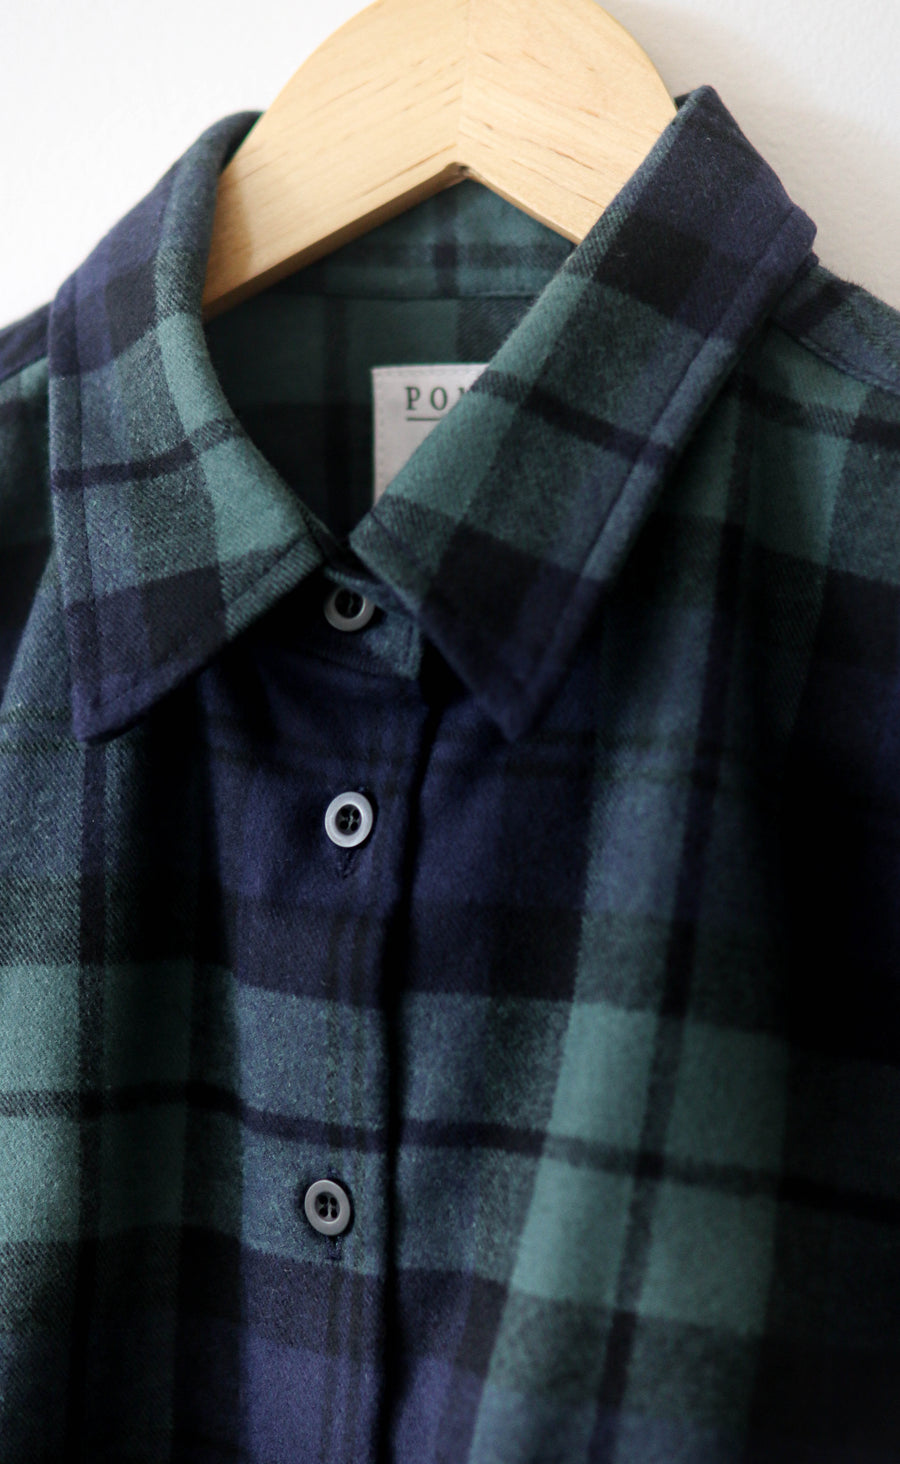 The Voyager - Proper Fit - Heavy Flannel